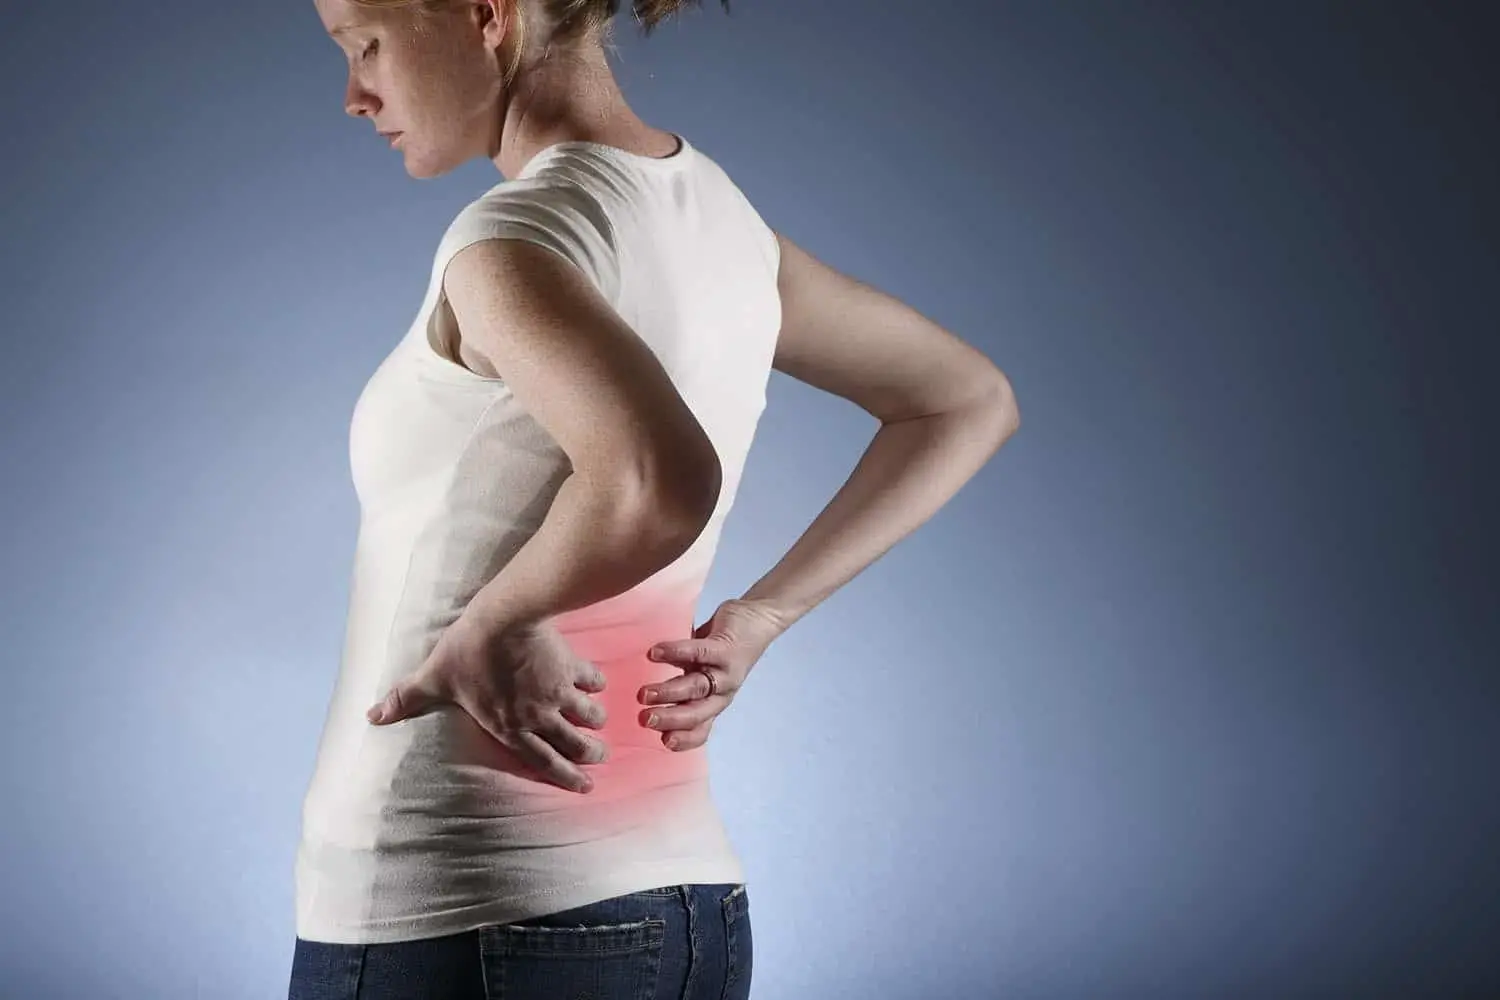 How To Improve Lower Back Pain with Chiropractic Care